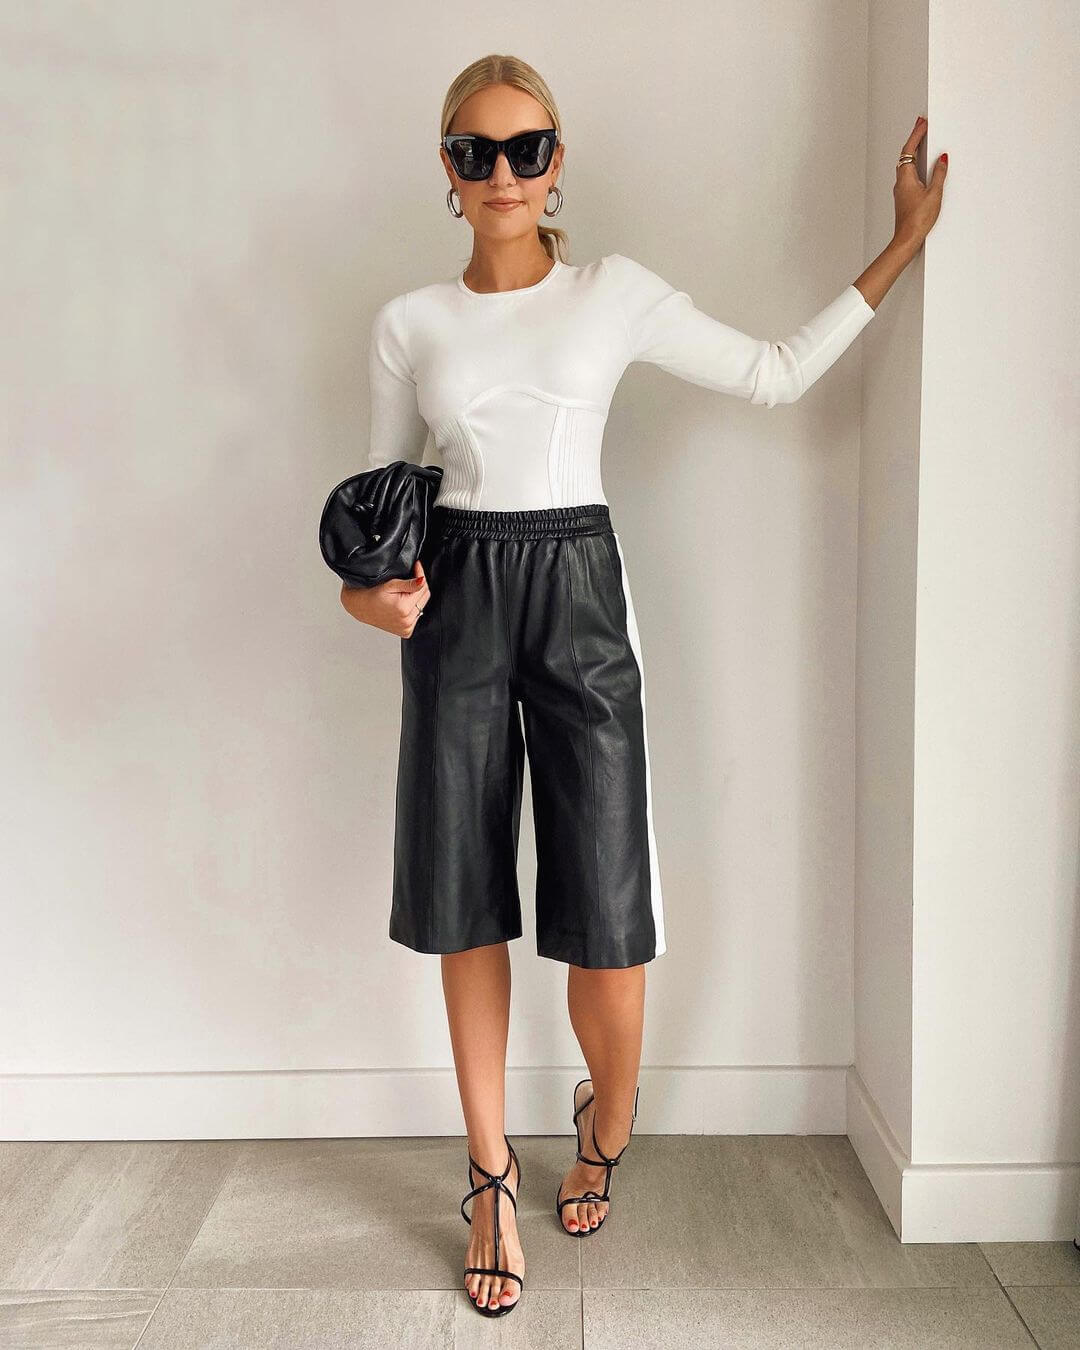 10 Endlessly Chic Outfits For Minimalist Style Lovers - The Cool Hour ...